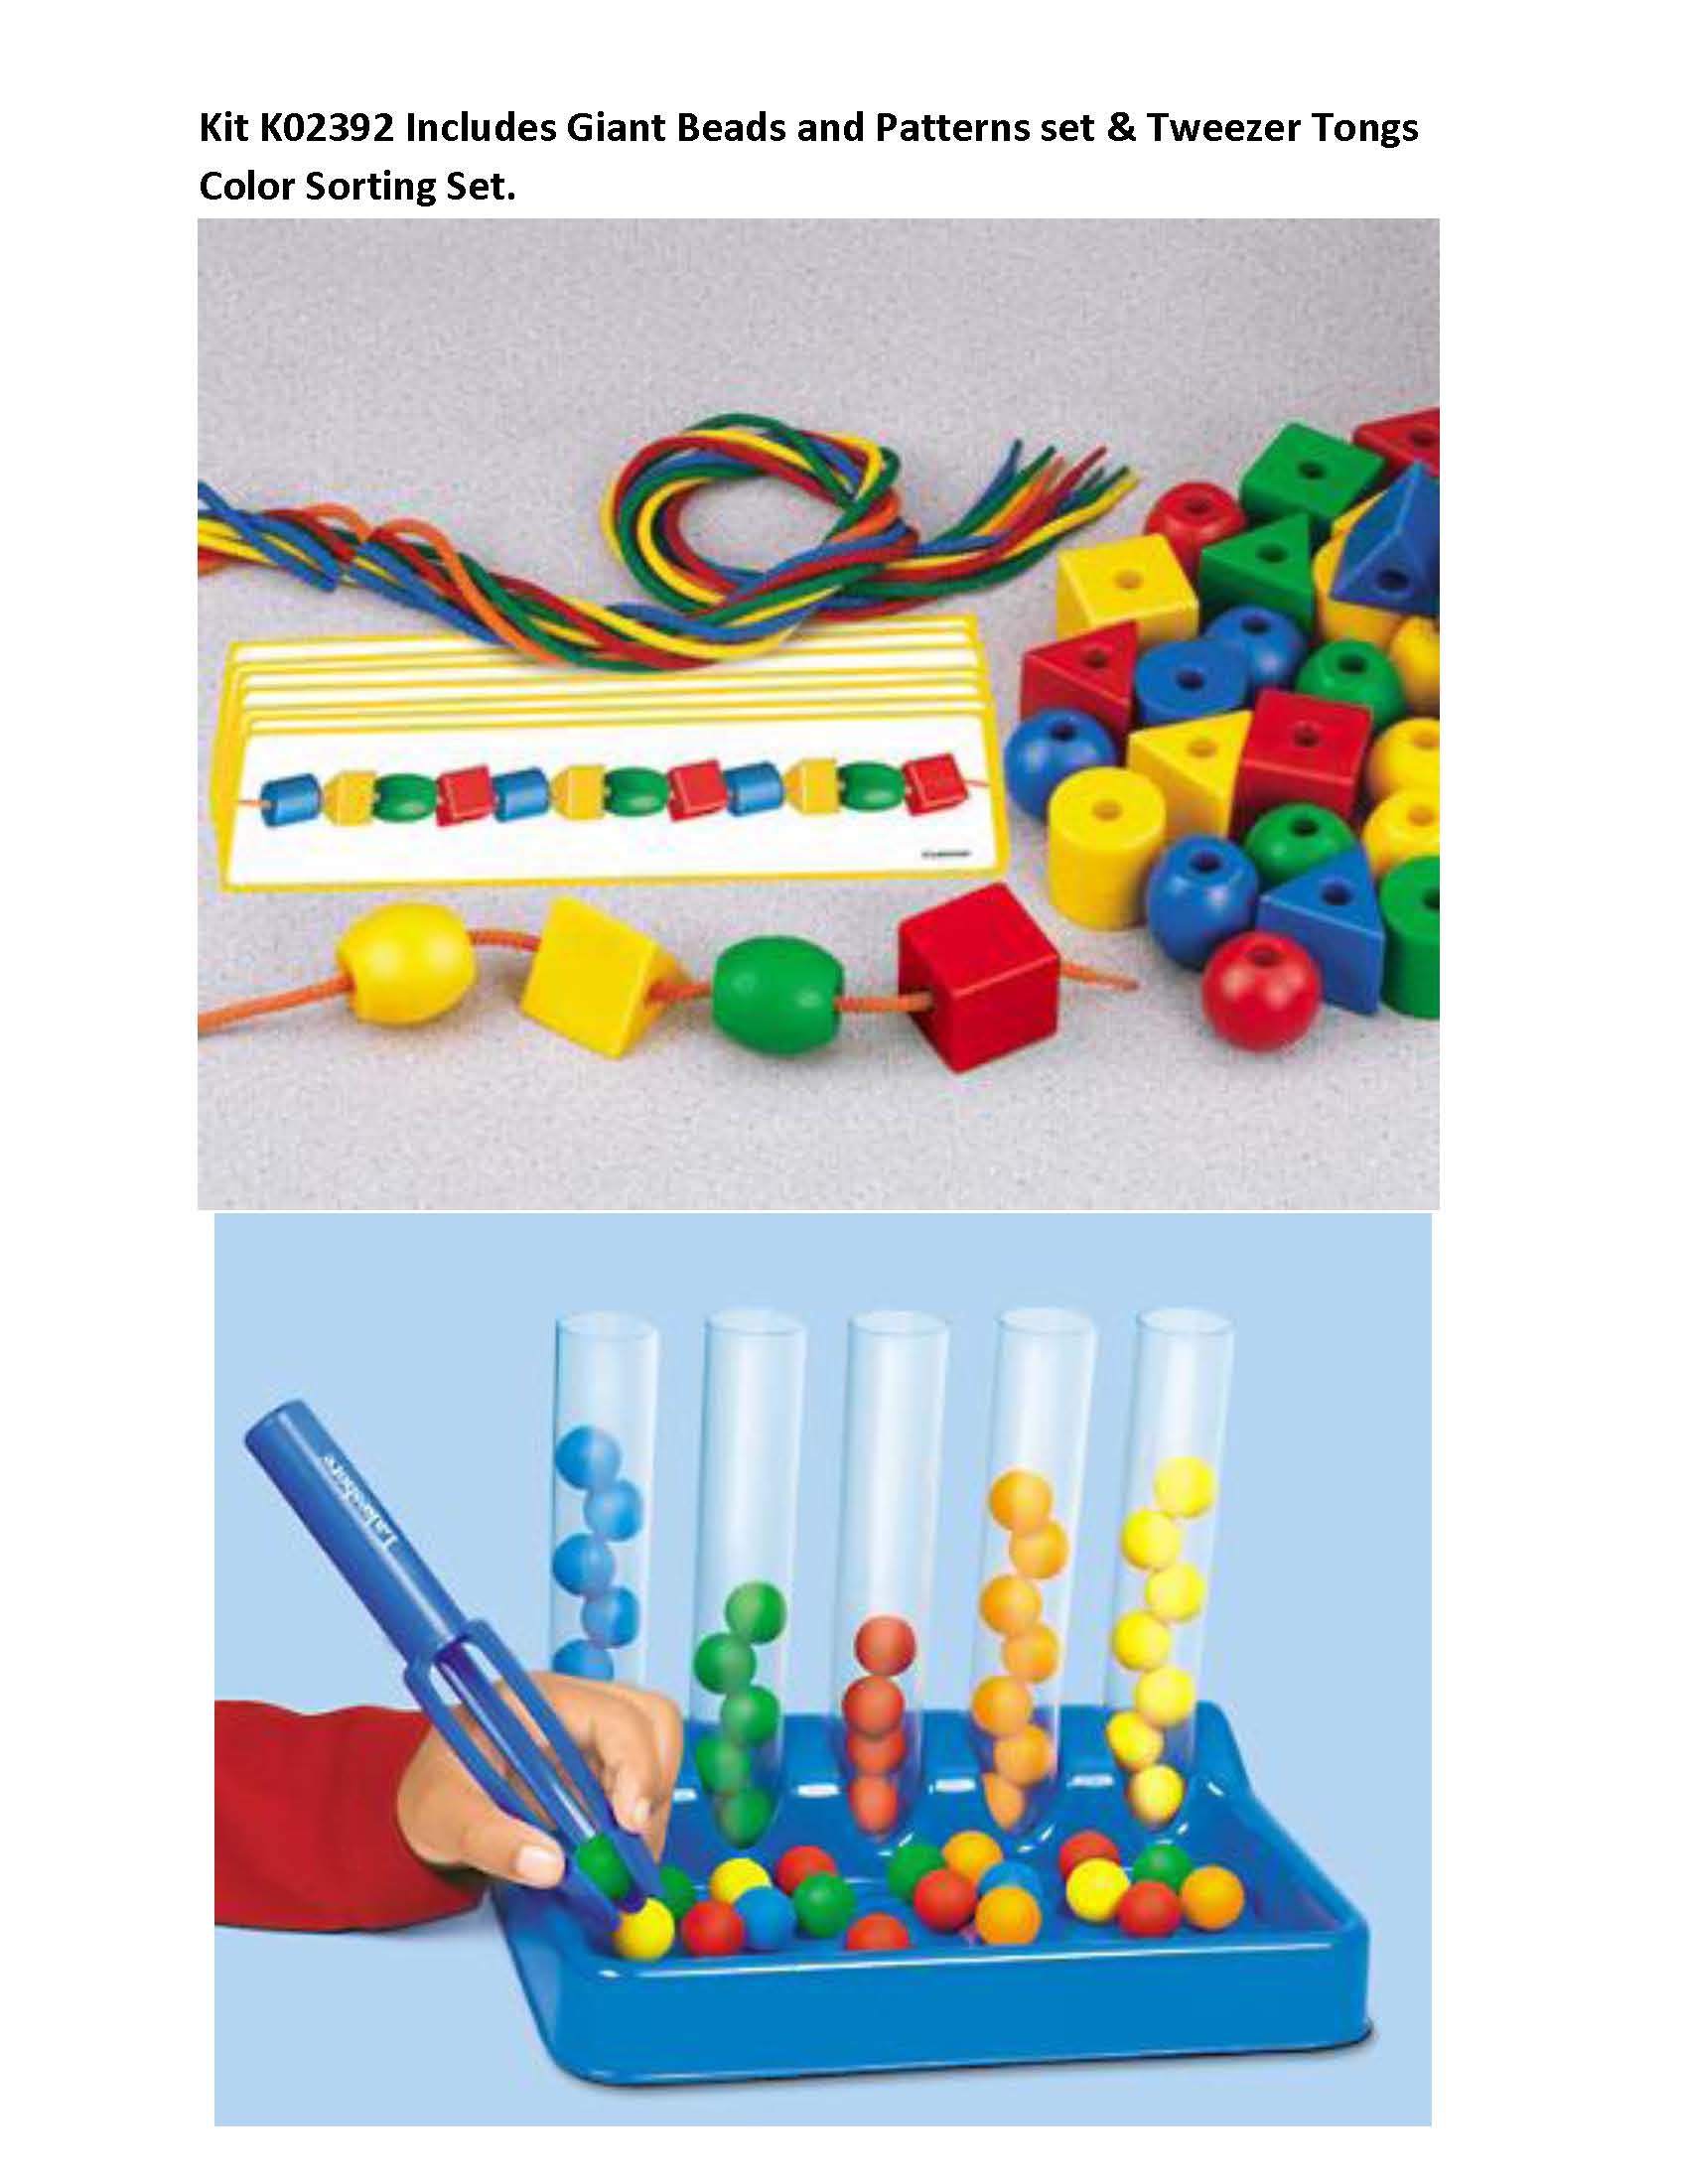 Manipulatives: Fine Motor/Counting/Sequencing Skills